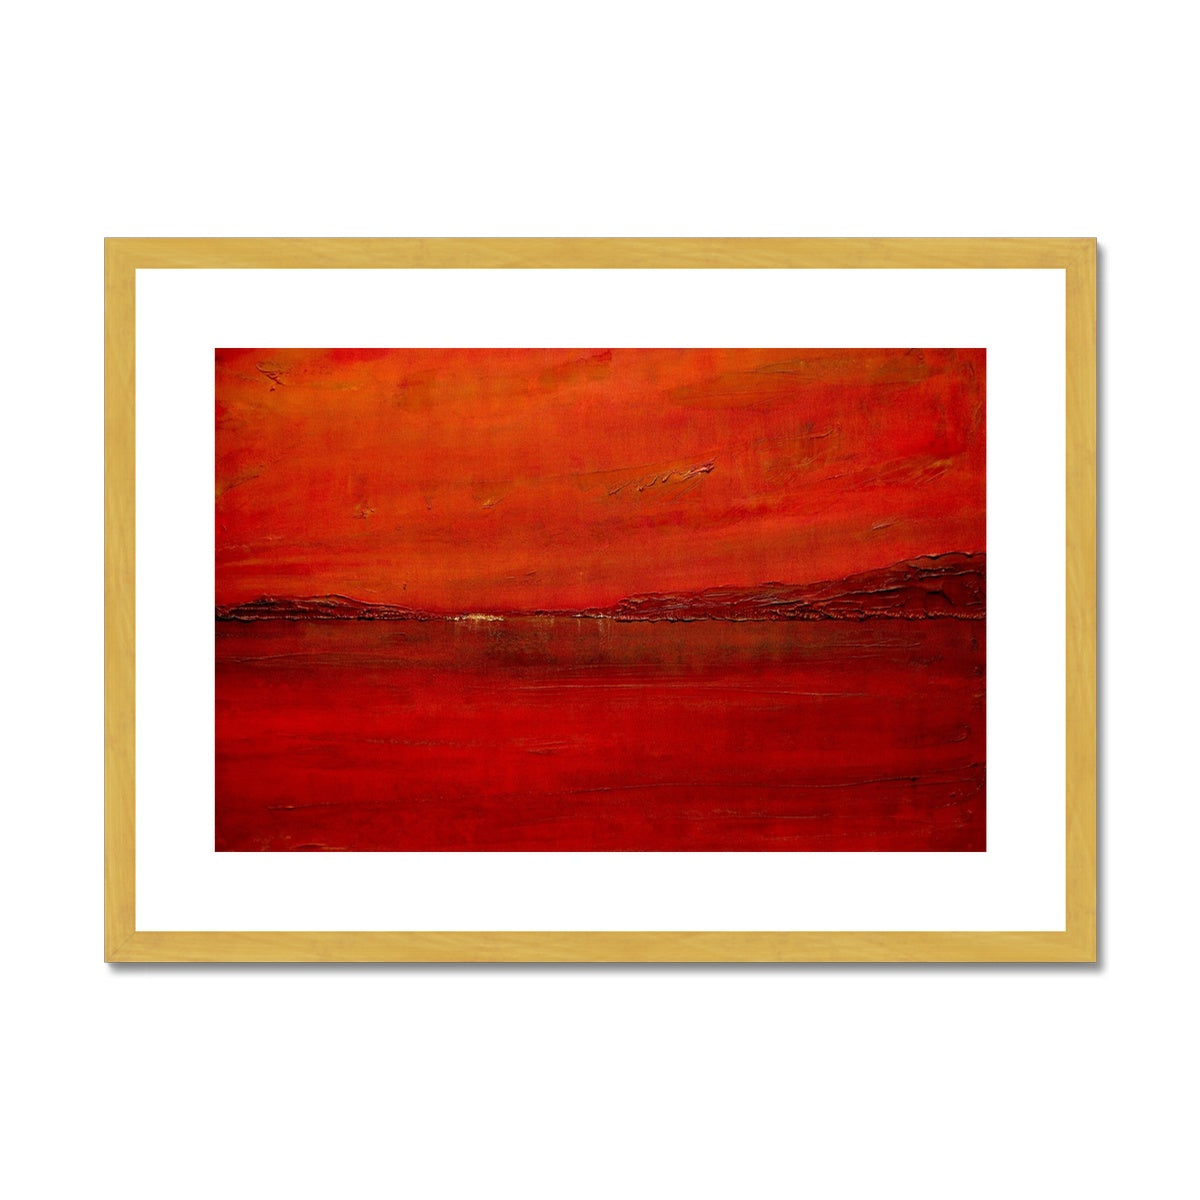 Deep Loch Lomond Sunset Painting | Antique Framed & Mounted Prints From Scotland-Antique Framed & Mounted Prints-Scottish Lochs & Mountains Art Gallery-A2 Landscape-Gold Frame-Paintings, Prints, Homeware, Art Gifts From Scotland By Scottish Artist Kevin Hunter